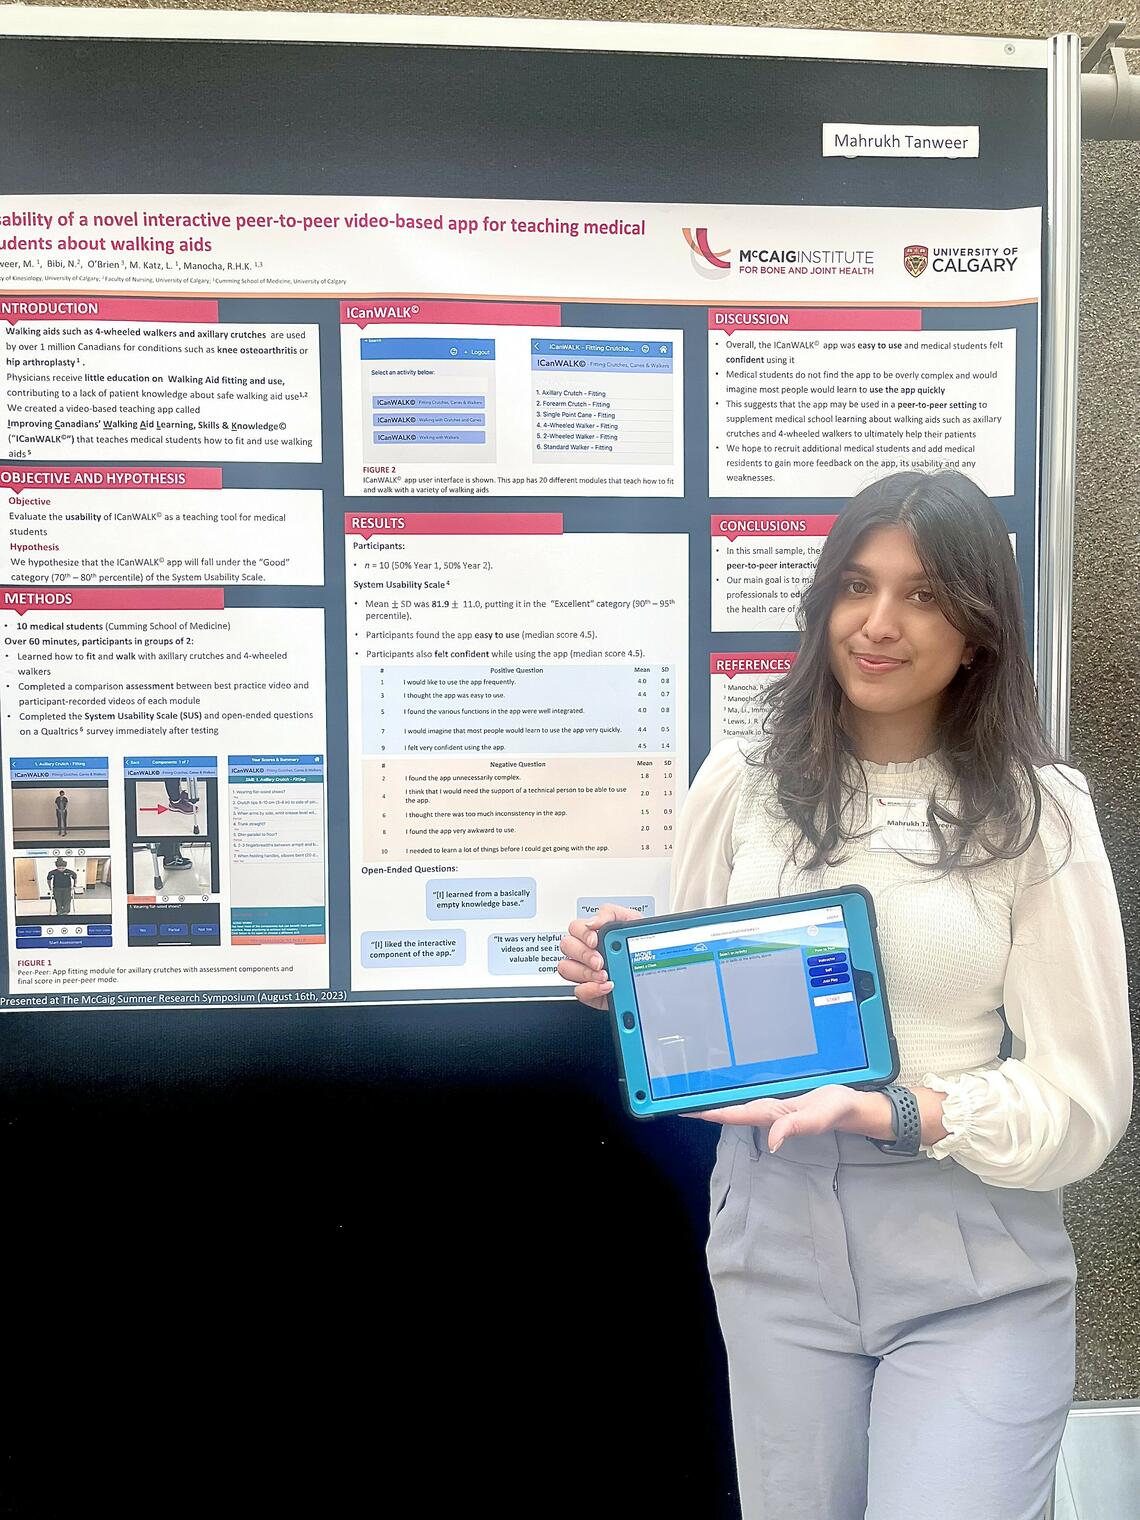 A woman stands in front of a presentation holding a tablet